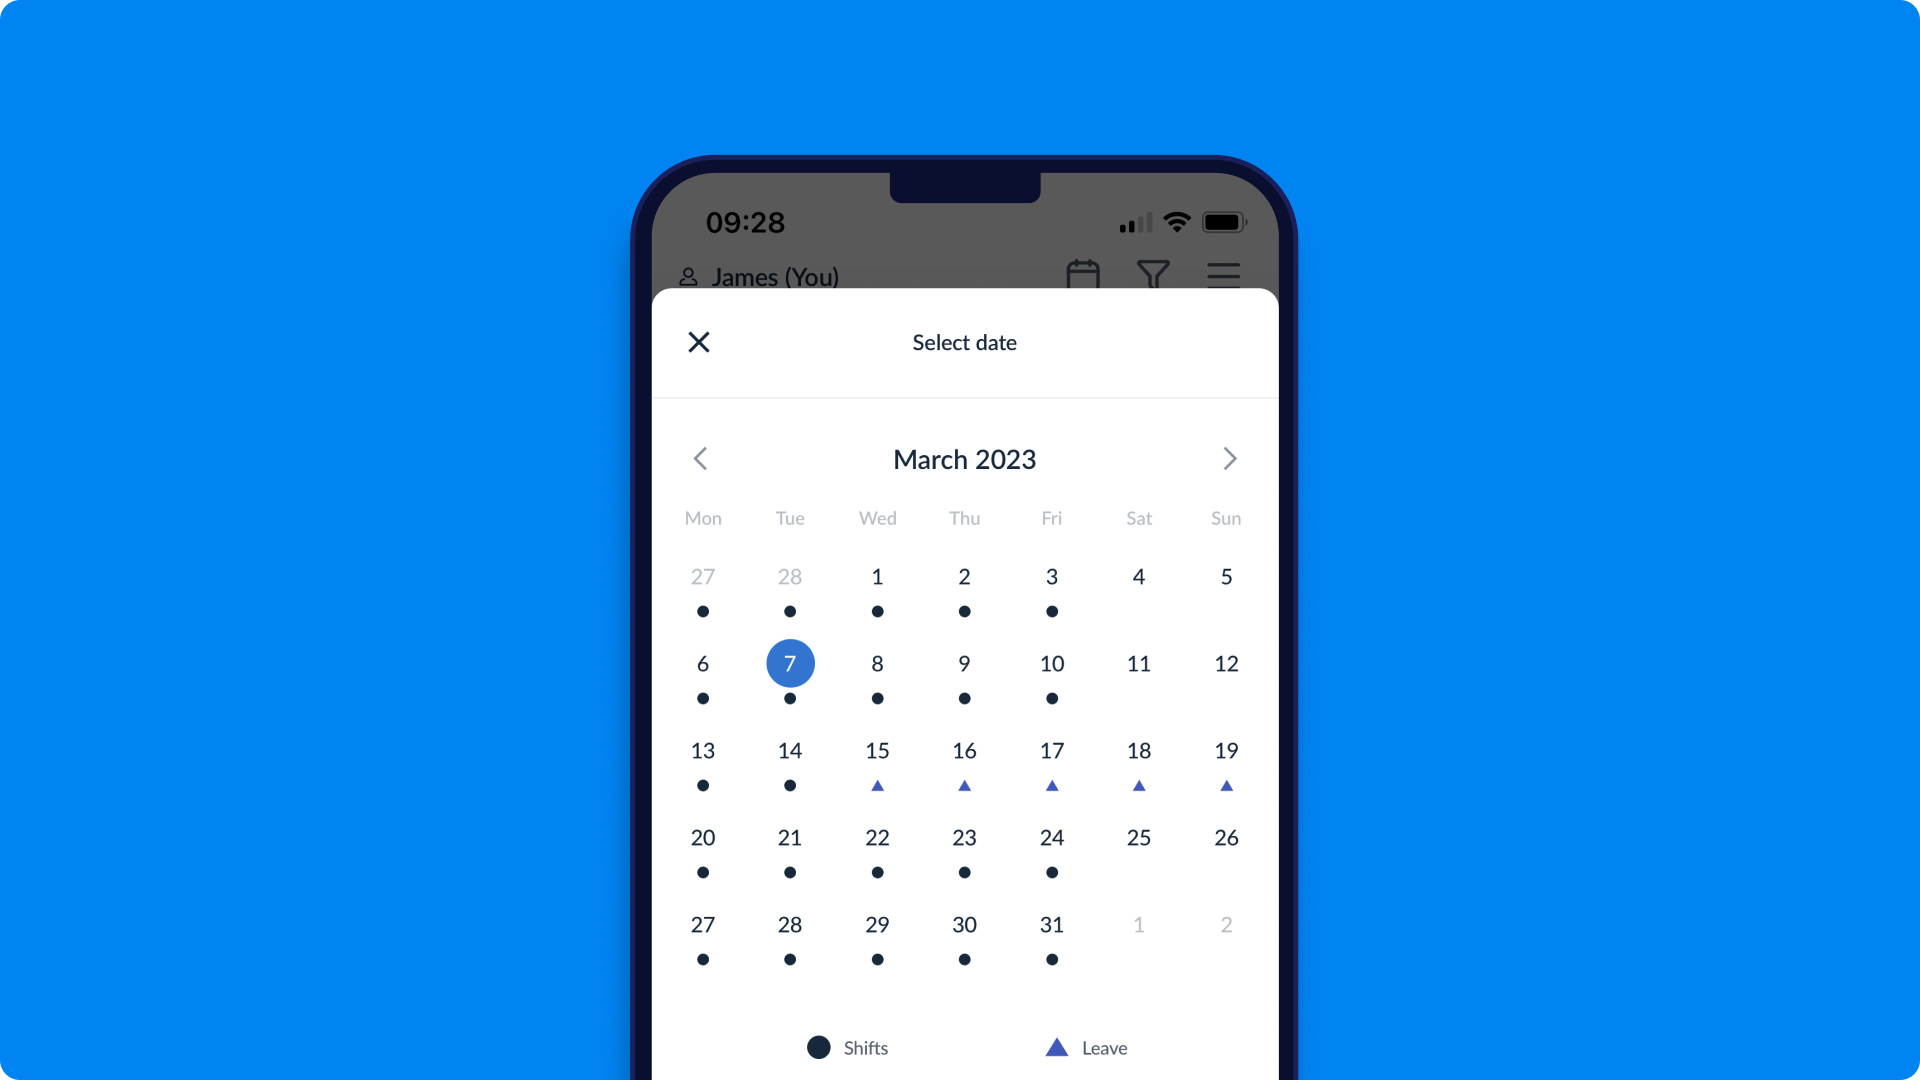 Mobile mockup showing a calendar marked with dots for shifts and annual leave